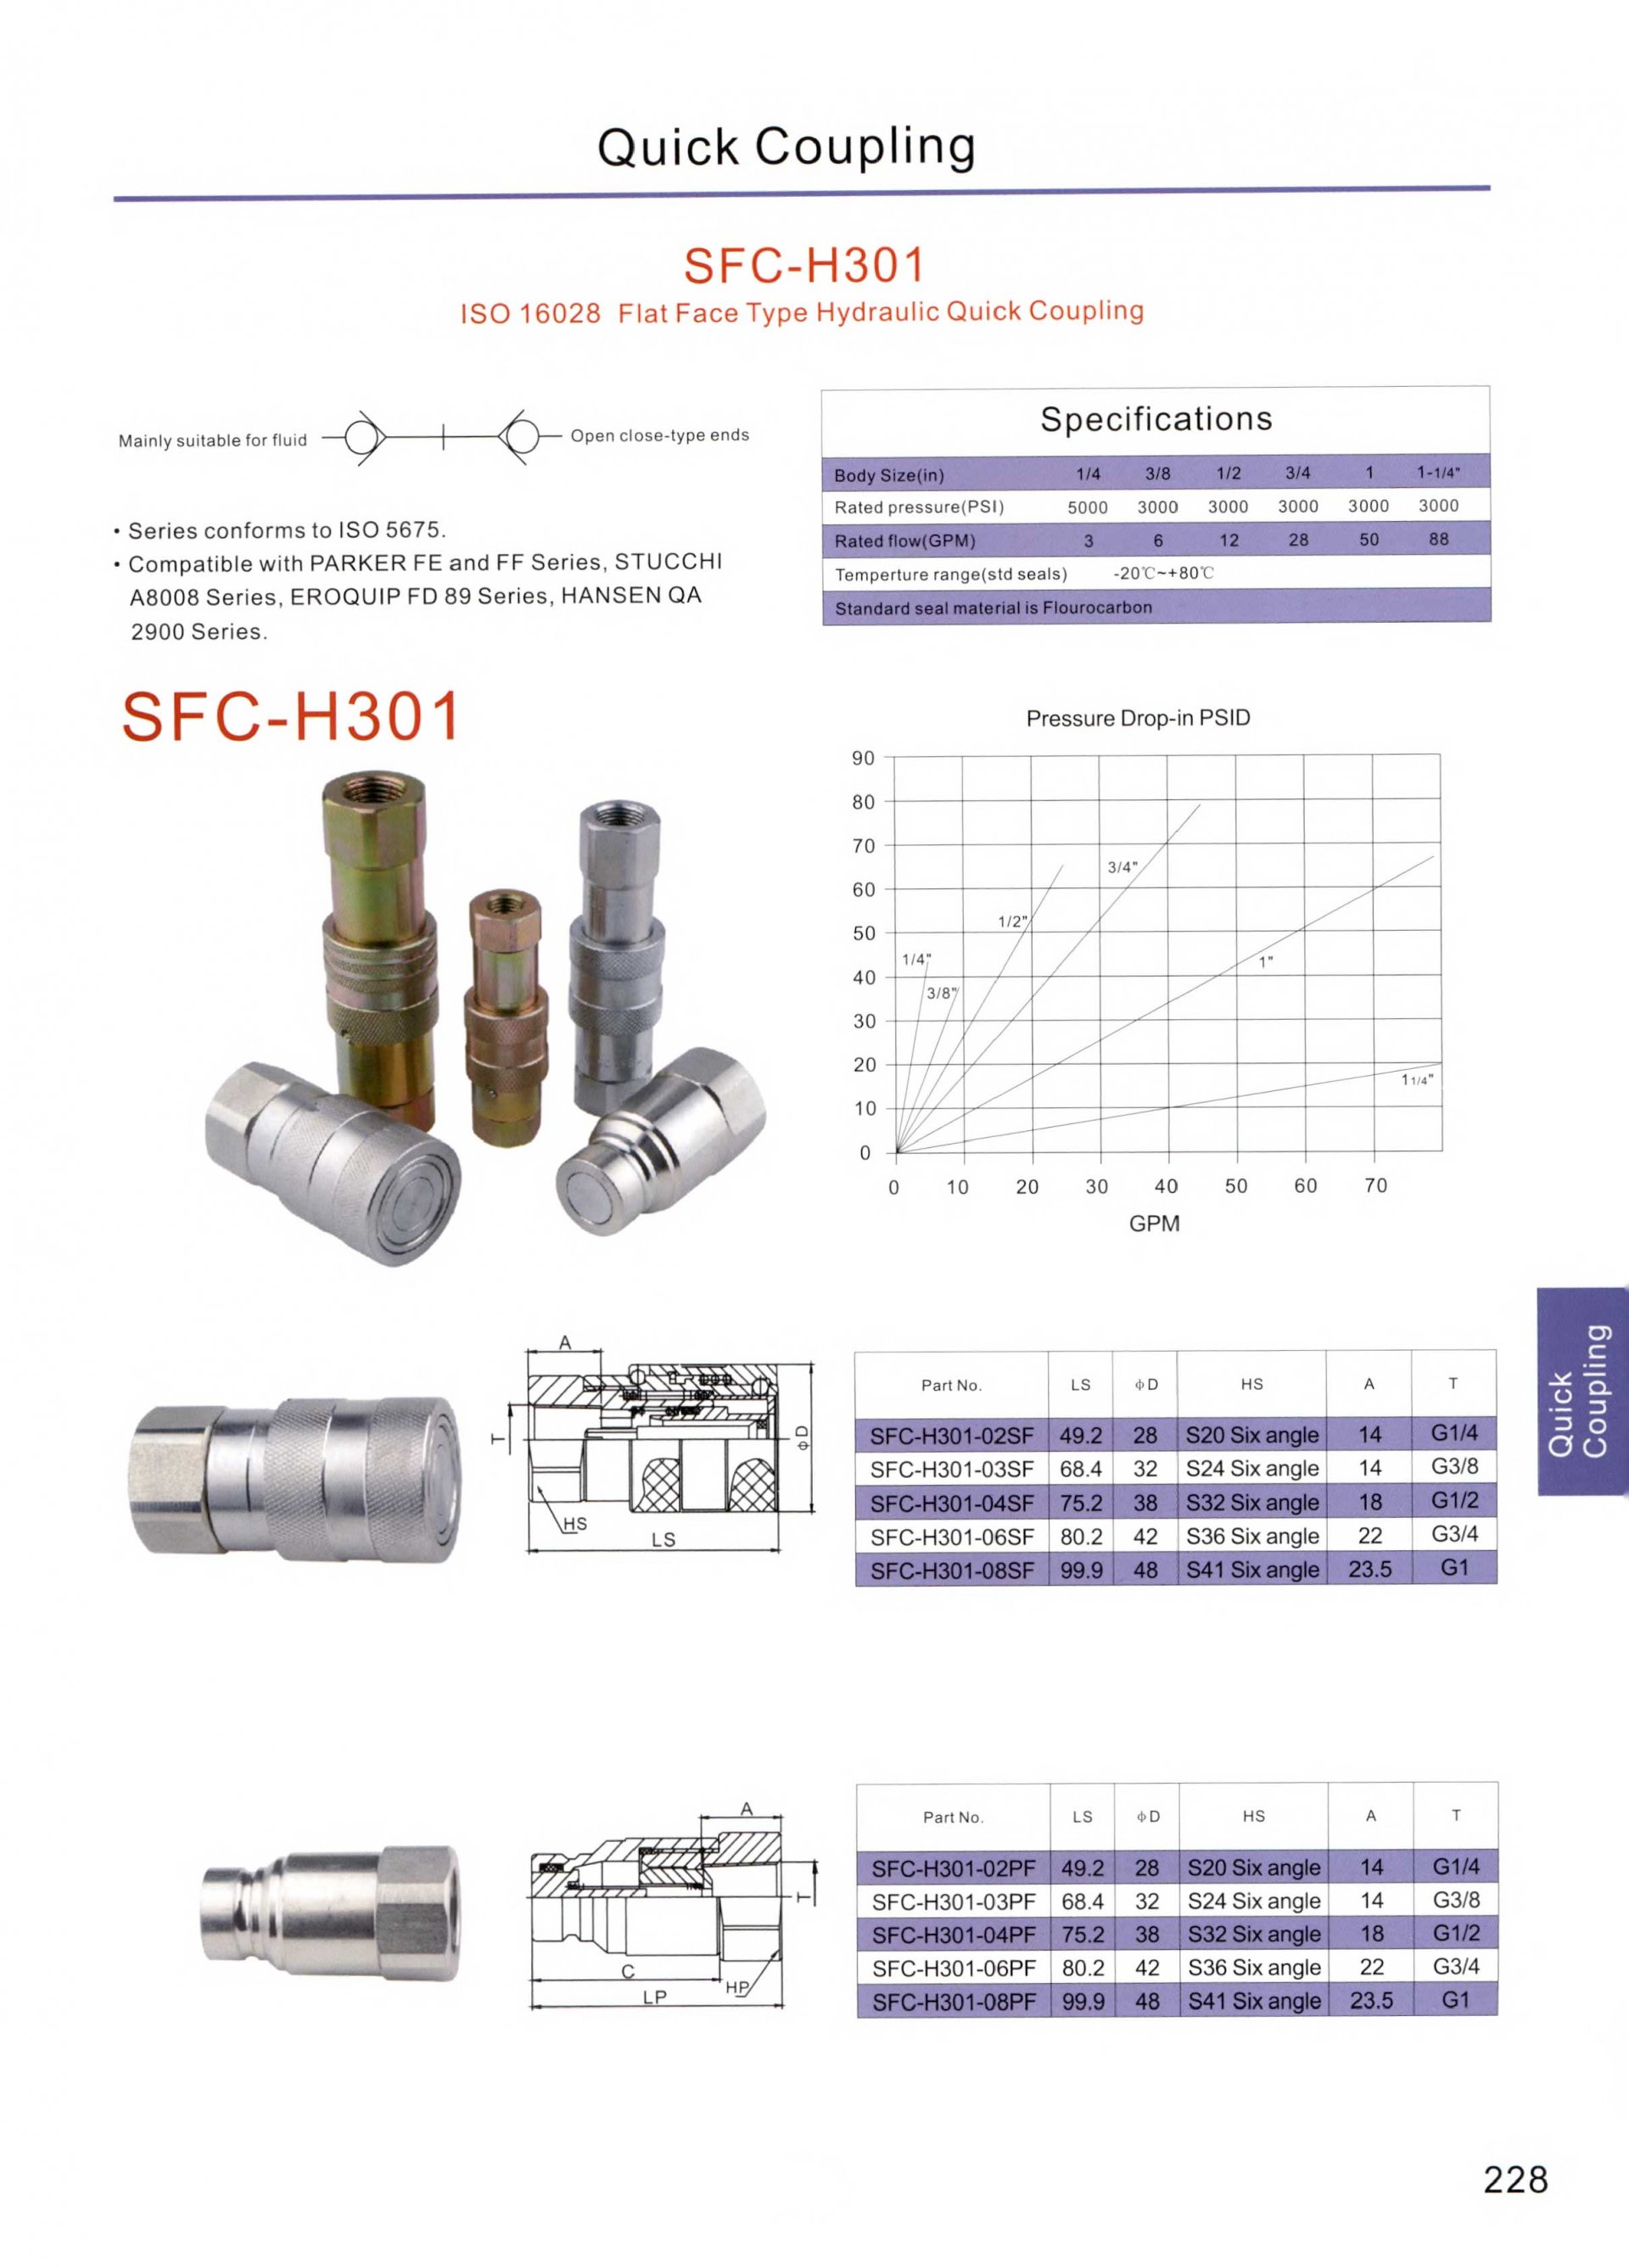 SFC-H301 ISO16228 Flat Face Type Hydraulic Quick Coupling